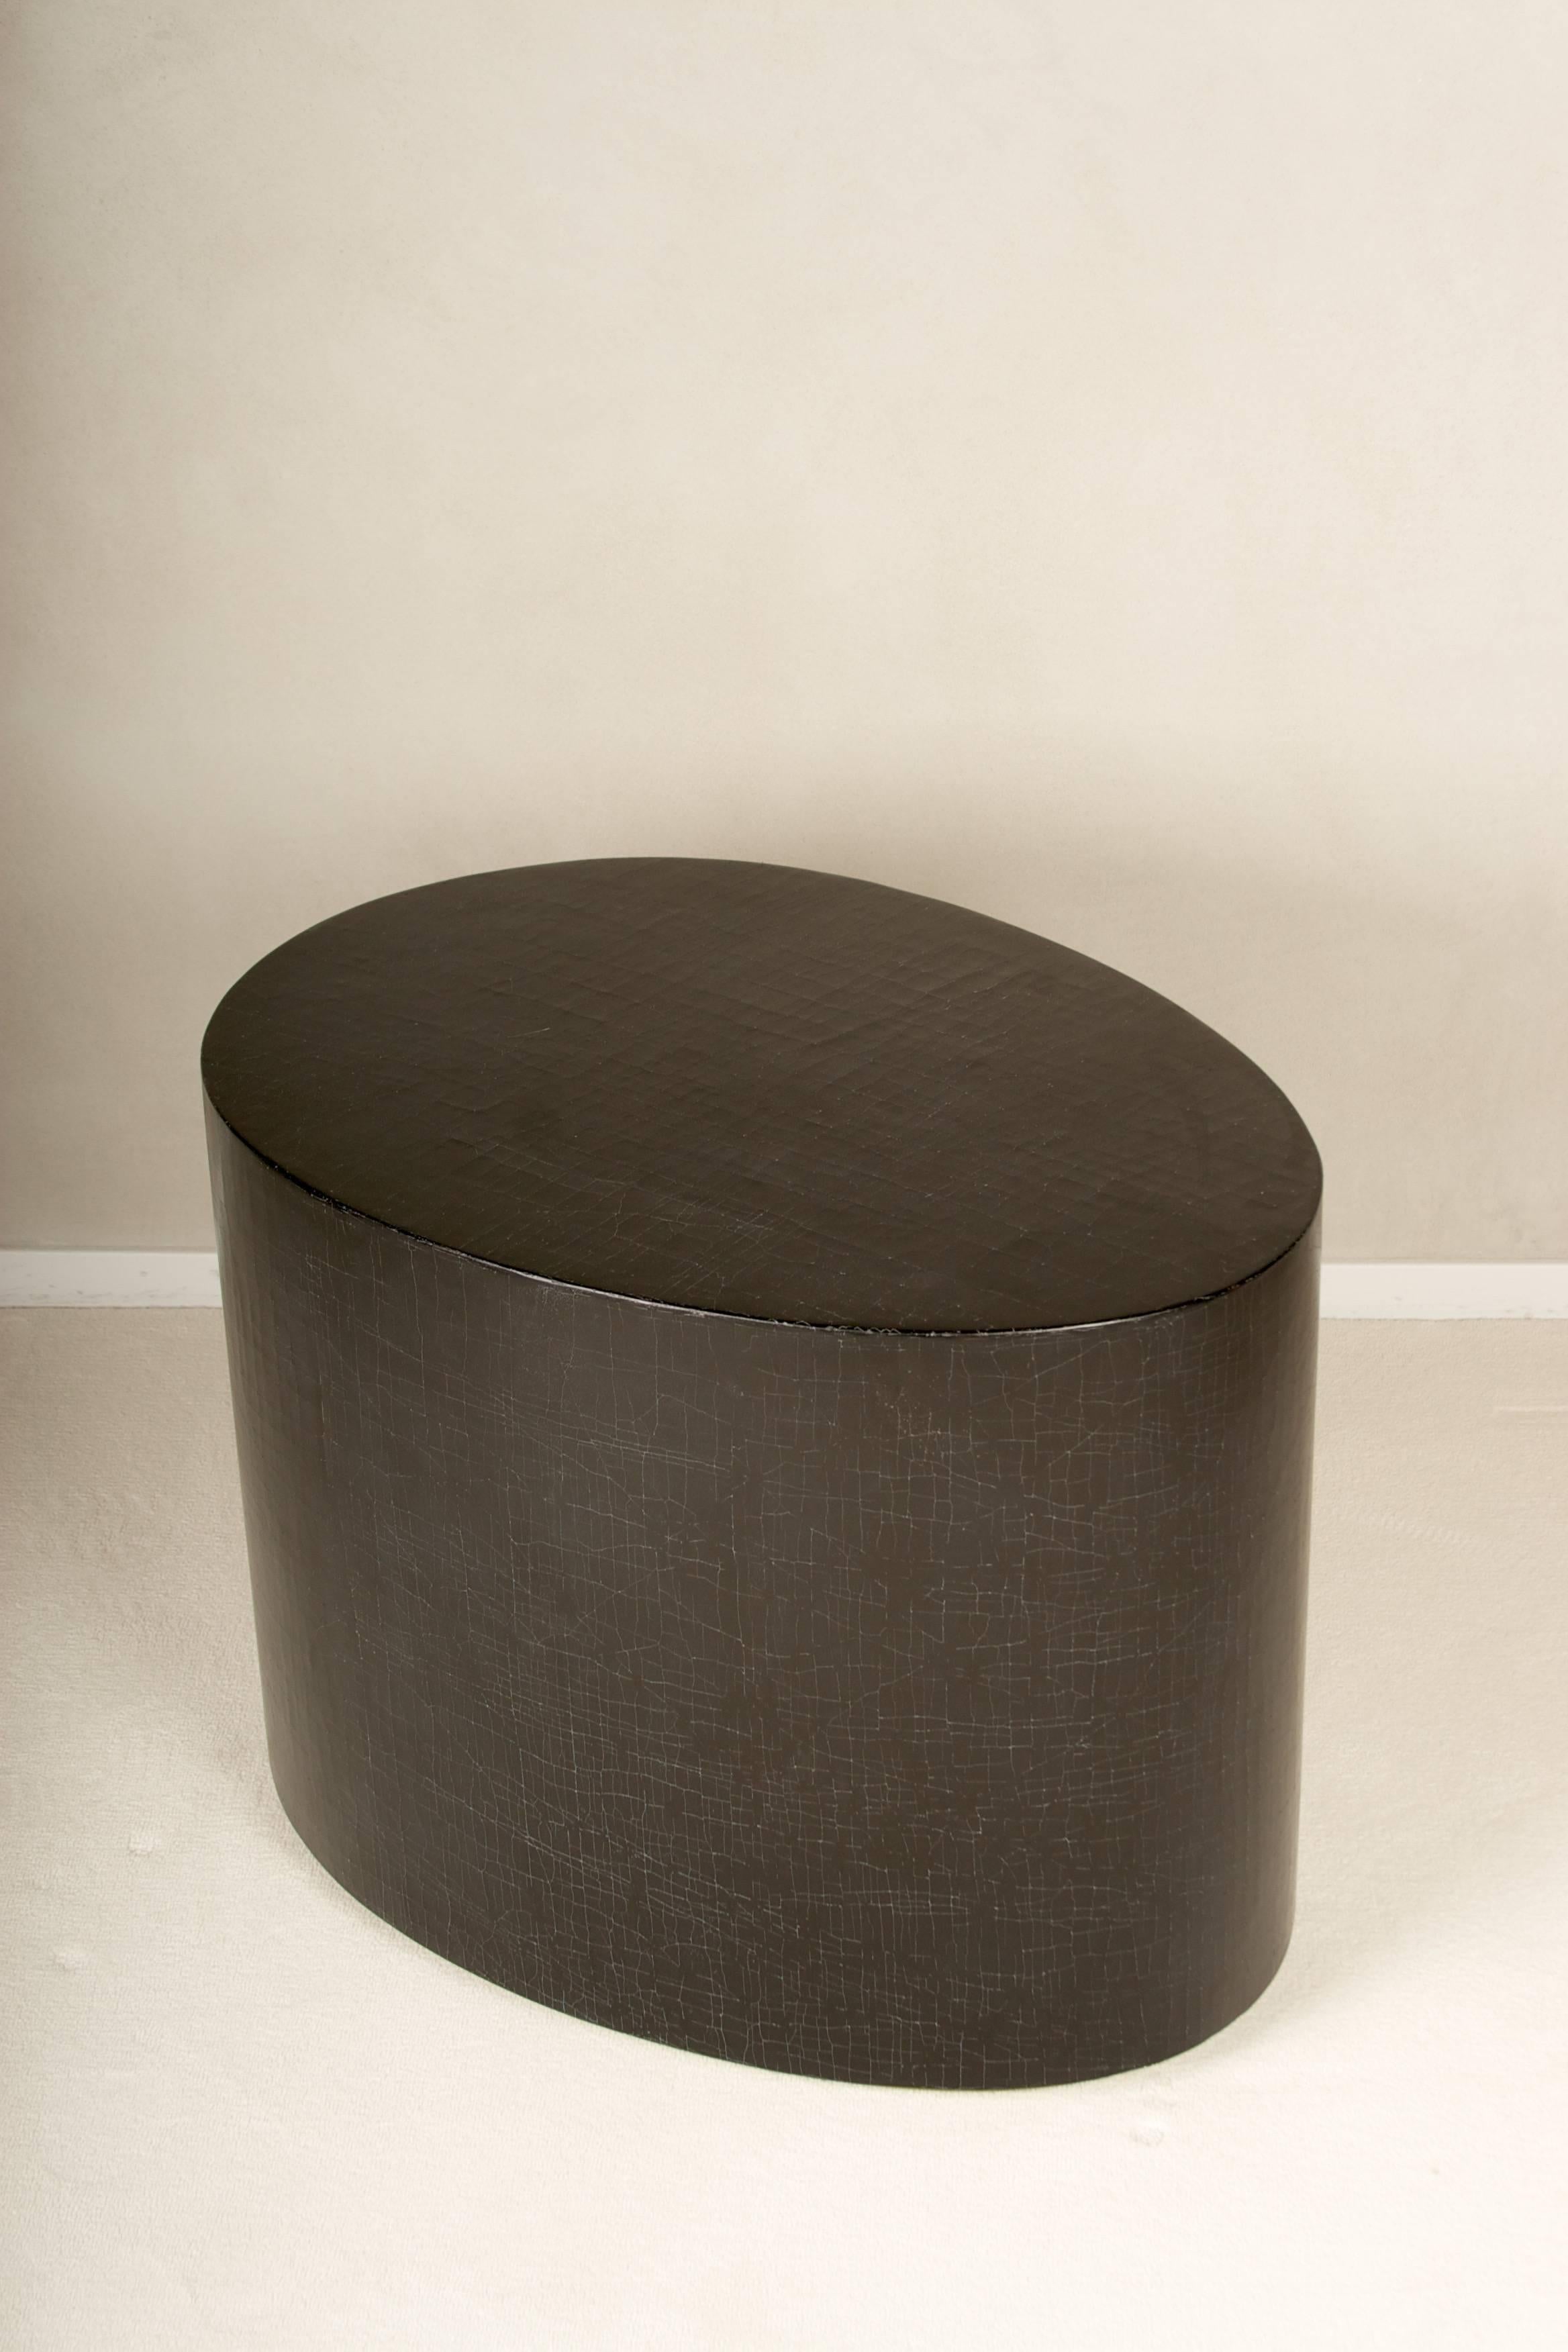 A perfectly proportioned egg shaped side table.
